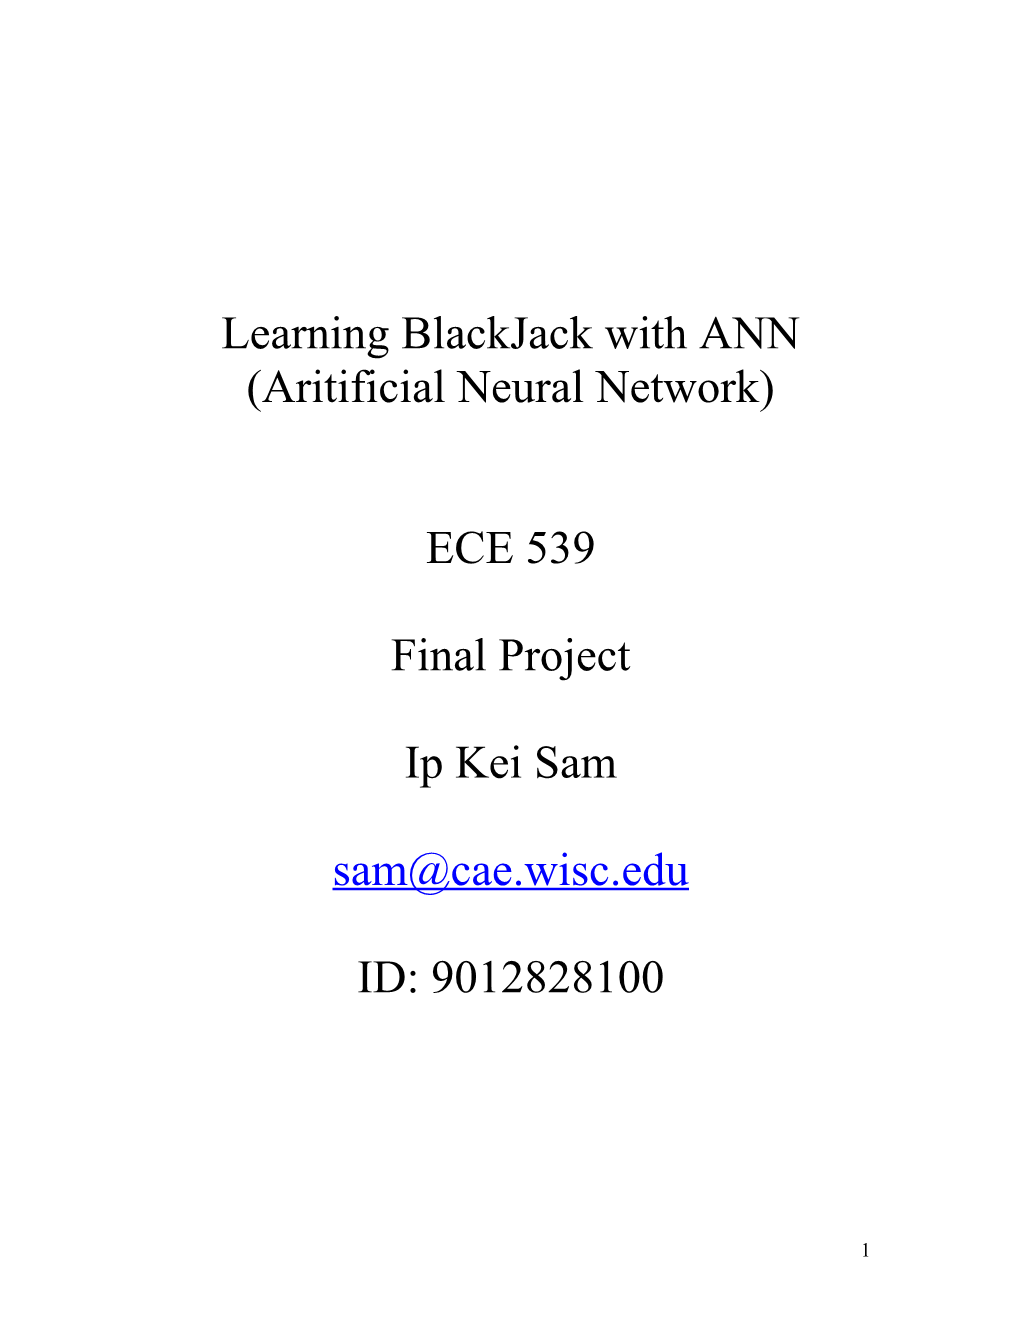 Learning Blackjack with Artificial Neural Network